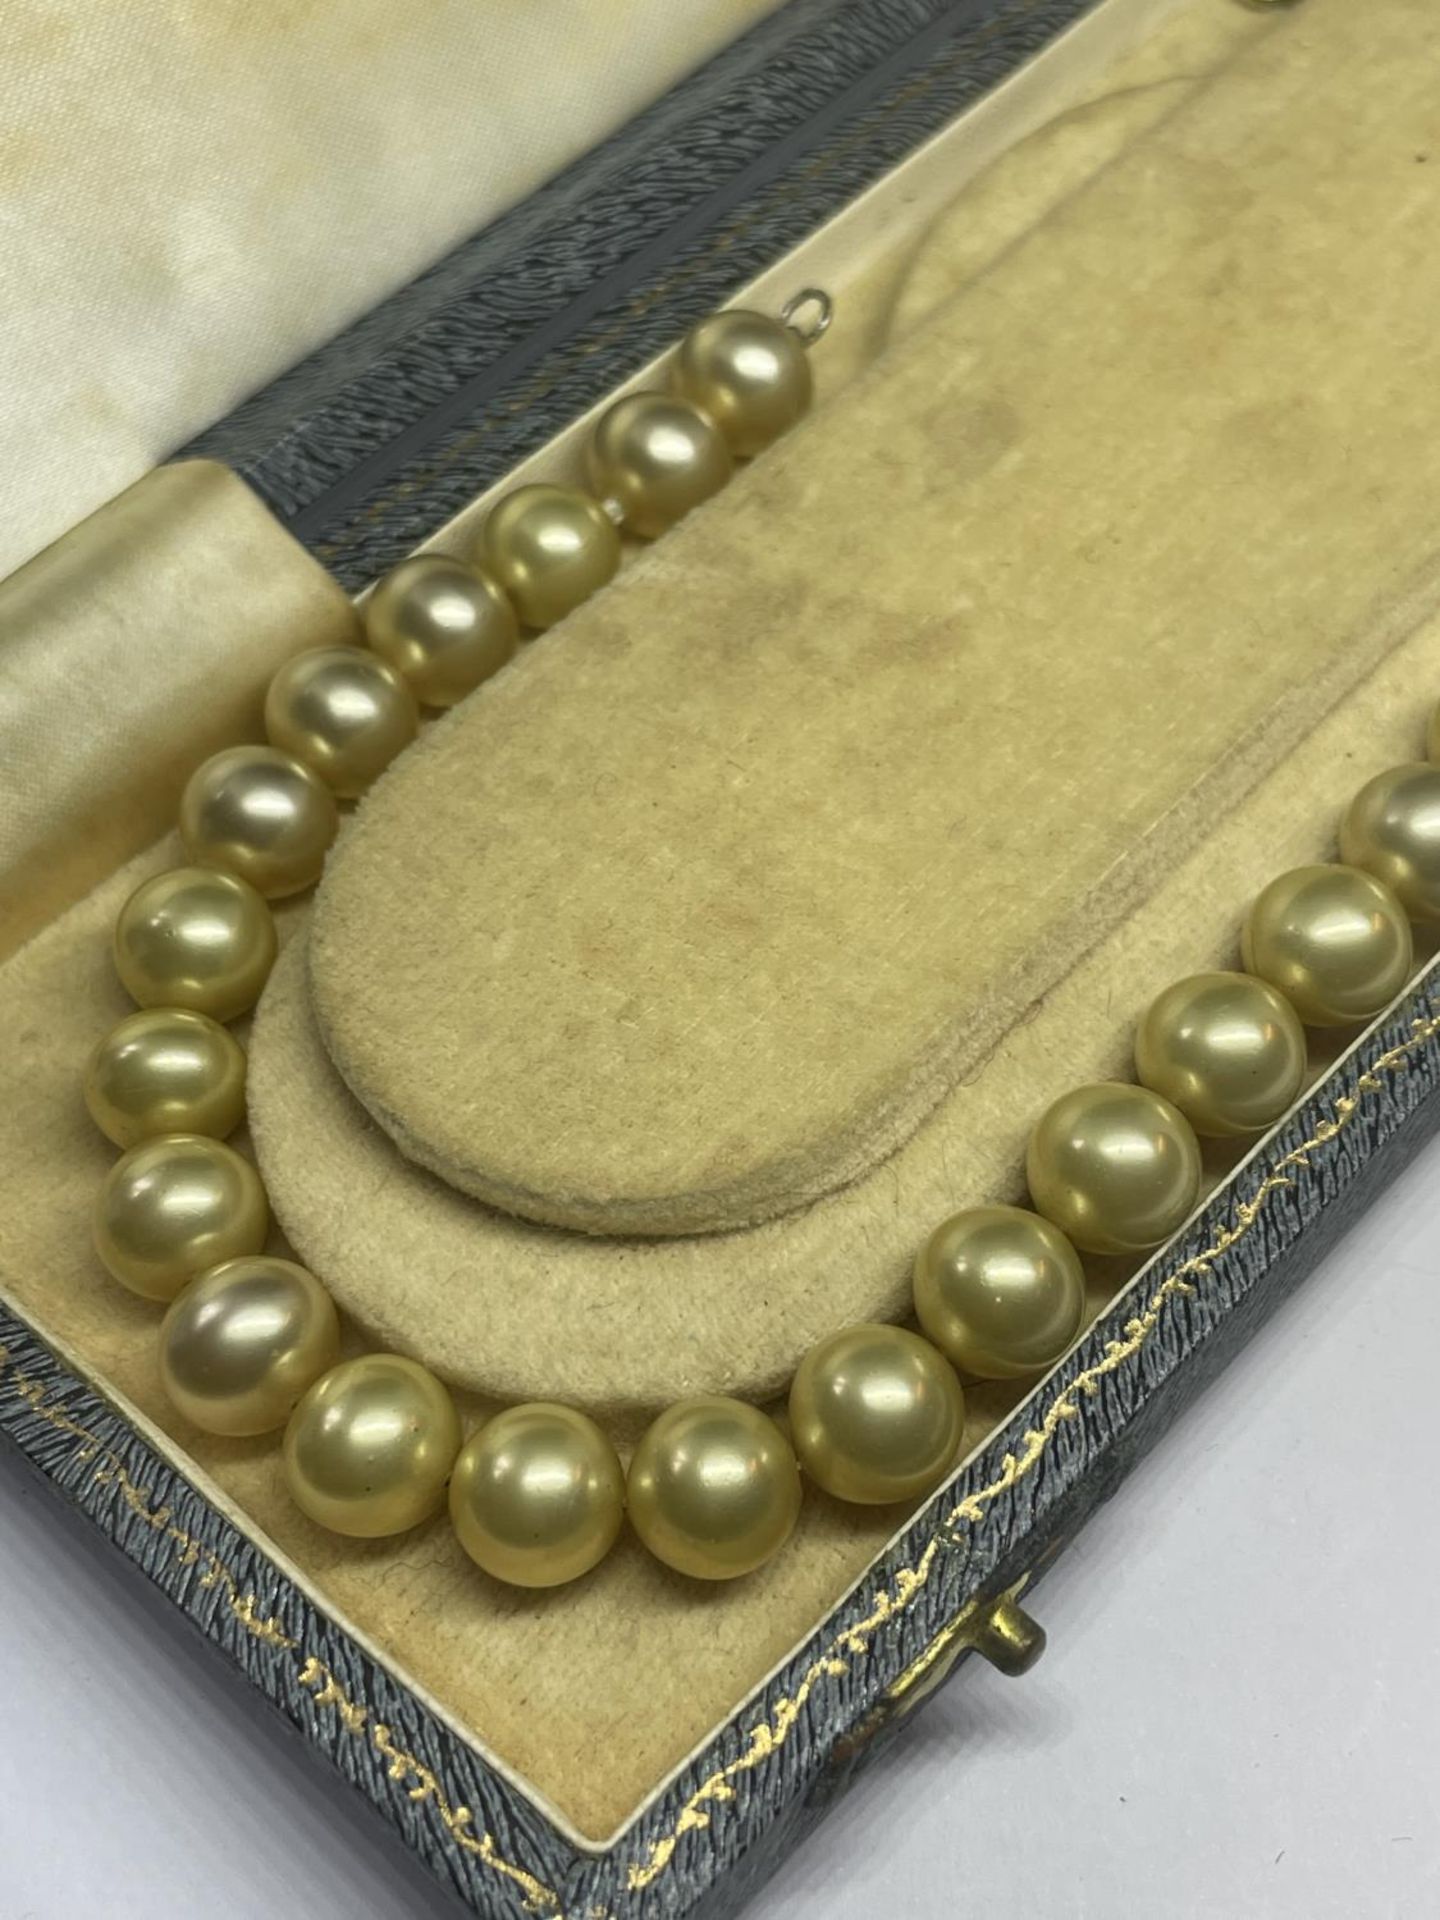 A PEARL NECKLACE IN A PRESENTATION BOX - Image 3 of 3